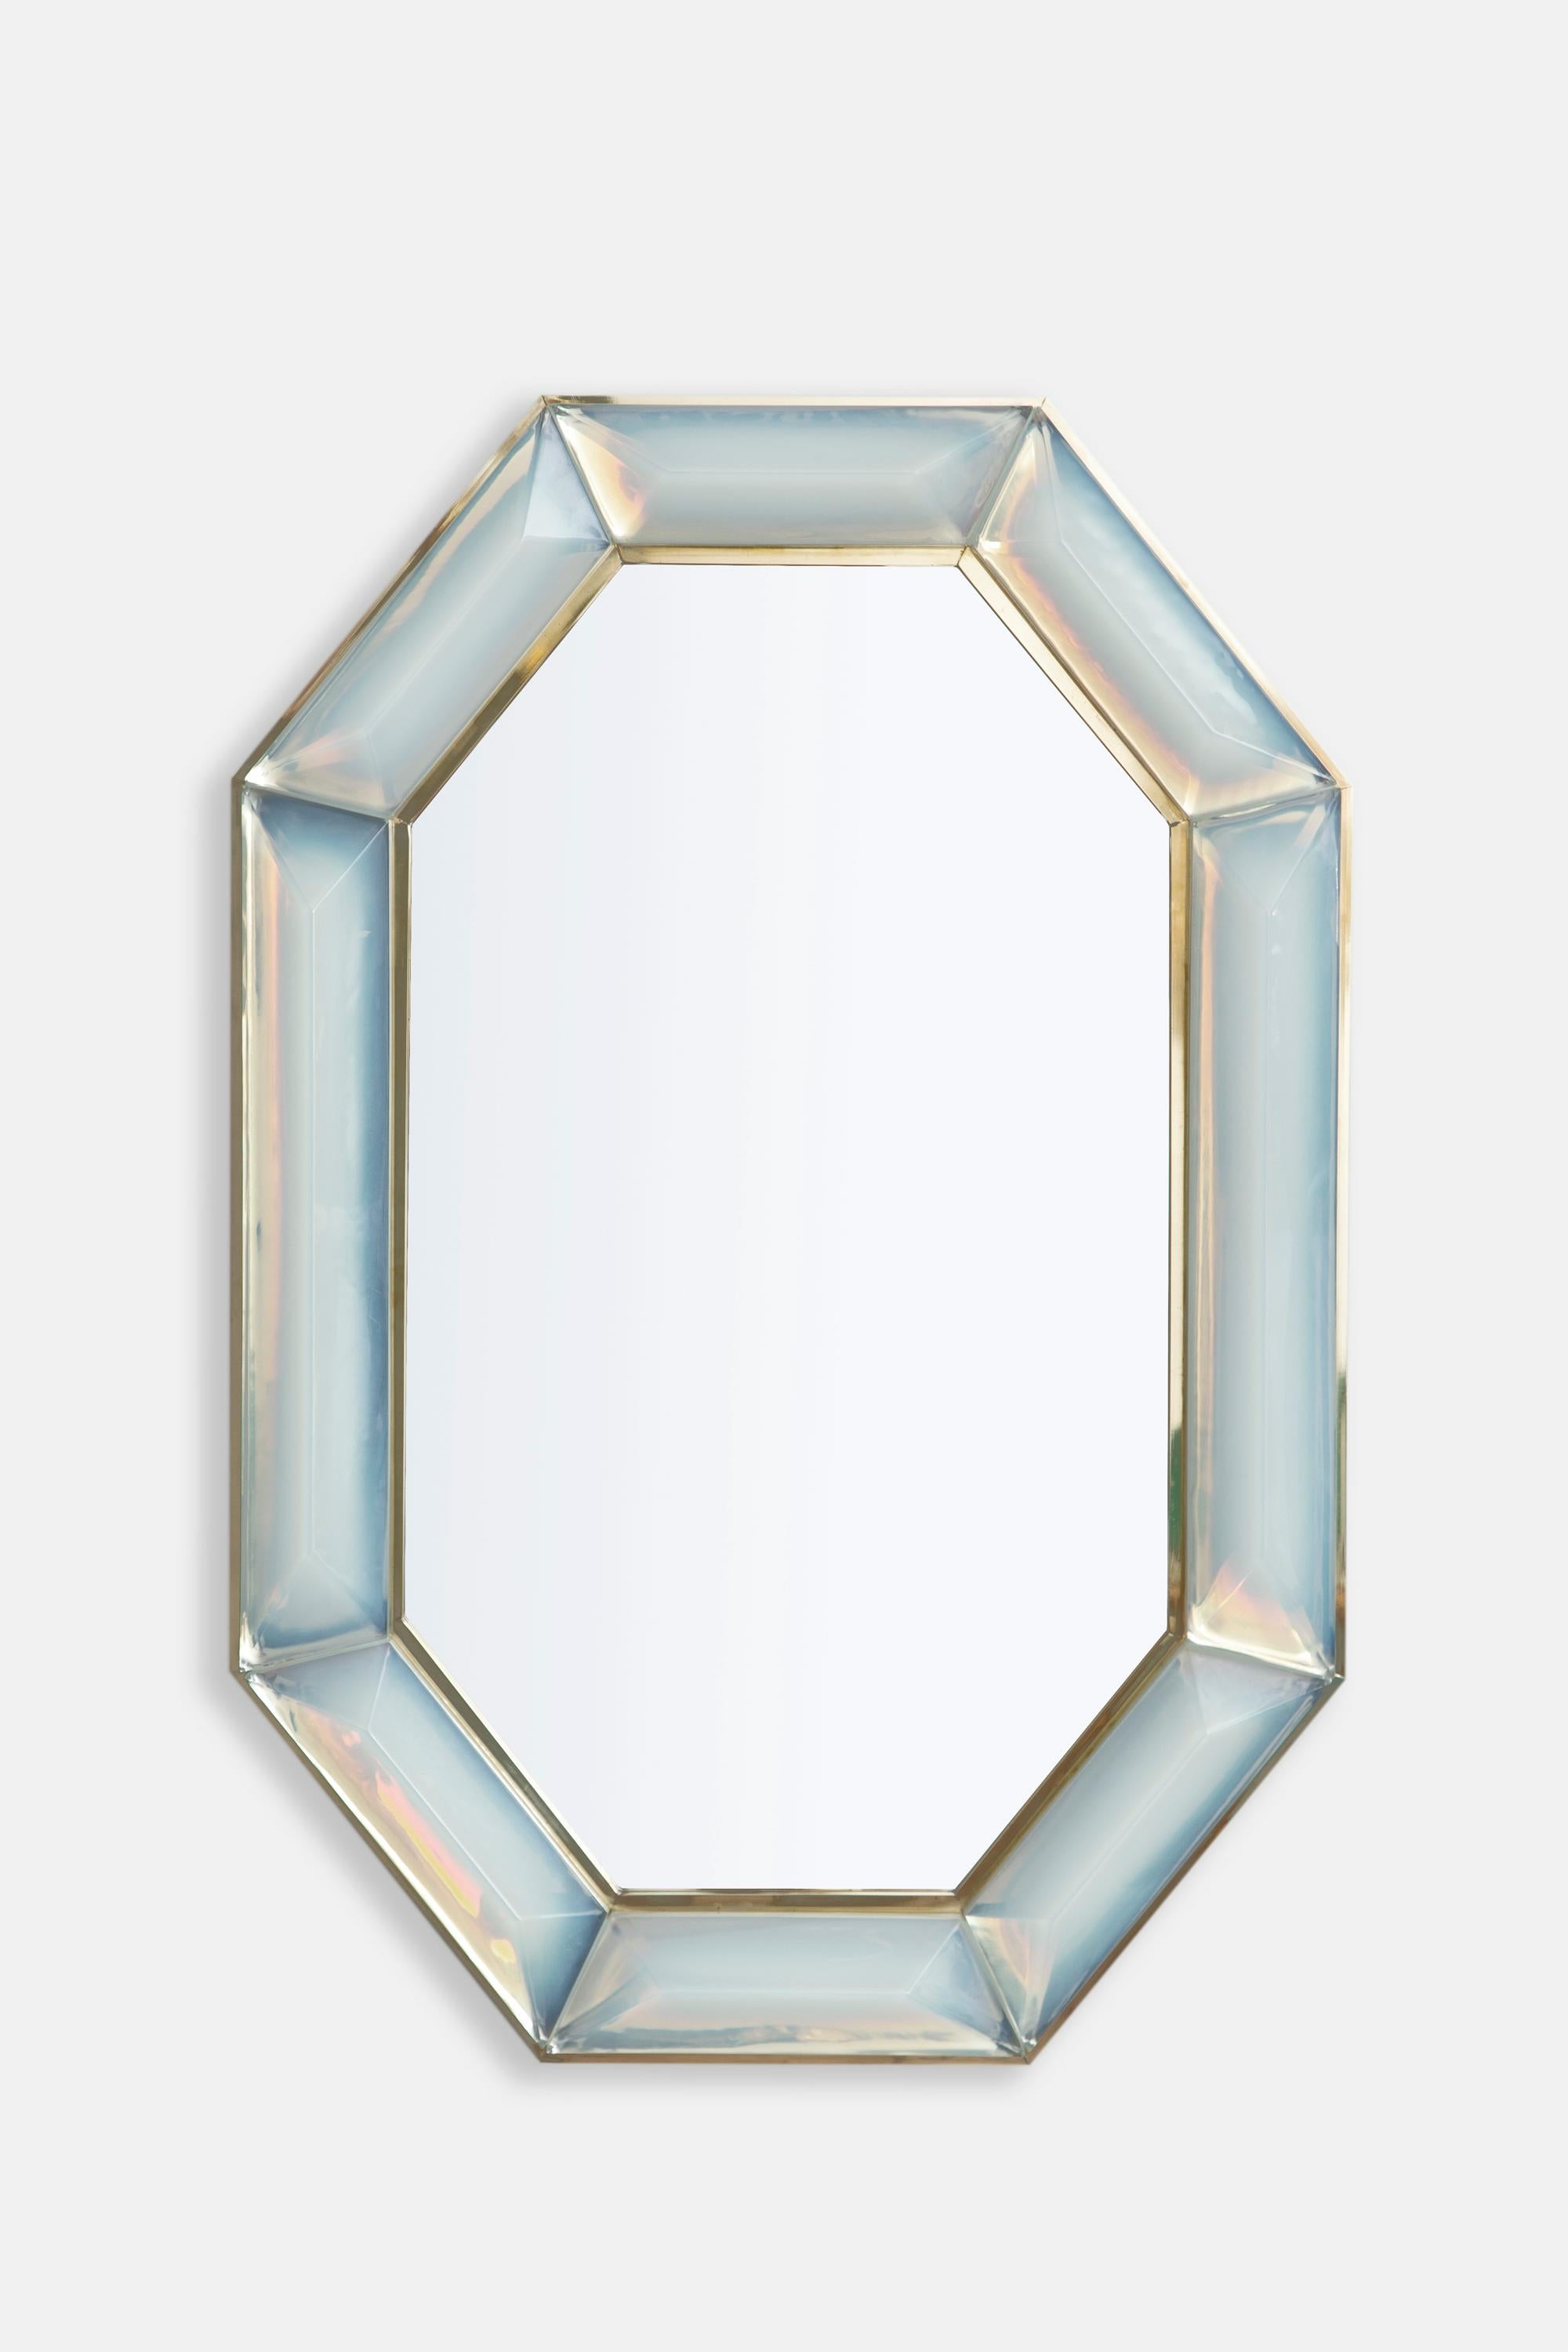 Bespoke octagonal iridescent opaline Murano glass mirror, in stock.
Vivid and intense iridescent opaline glass block with naturally occurring air inclusions throughout.
Highly polished faceted pattern.
Brass gallery all around.
Each mirror is a